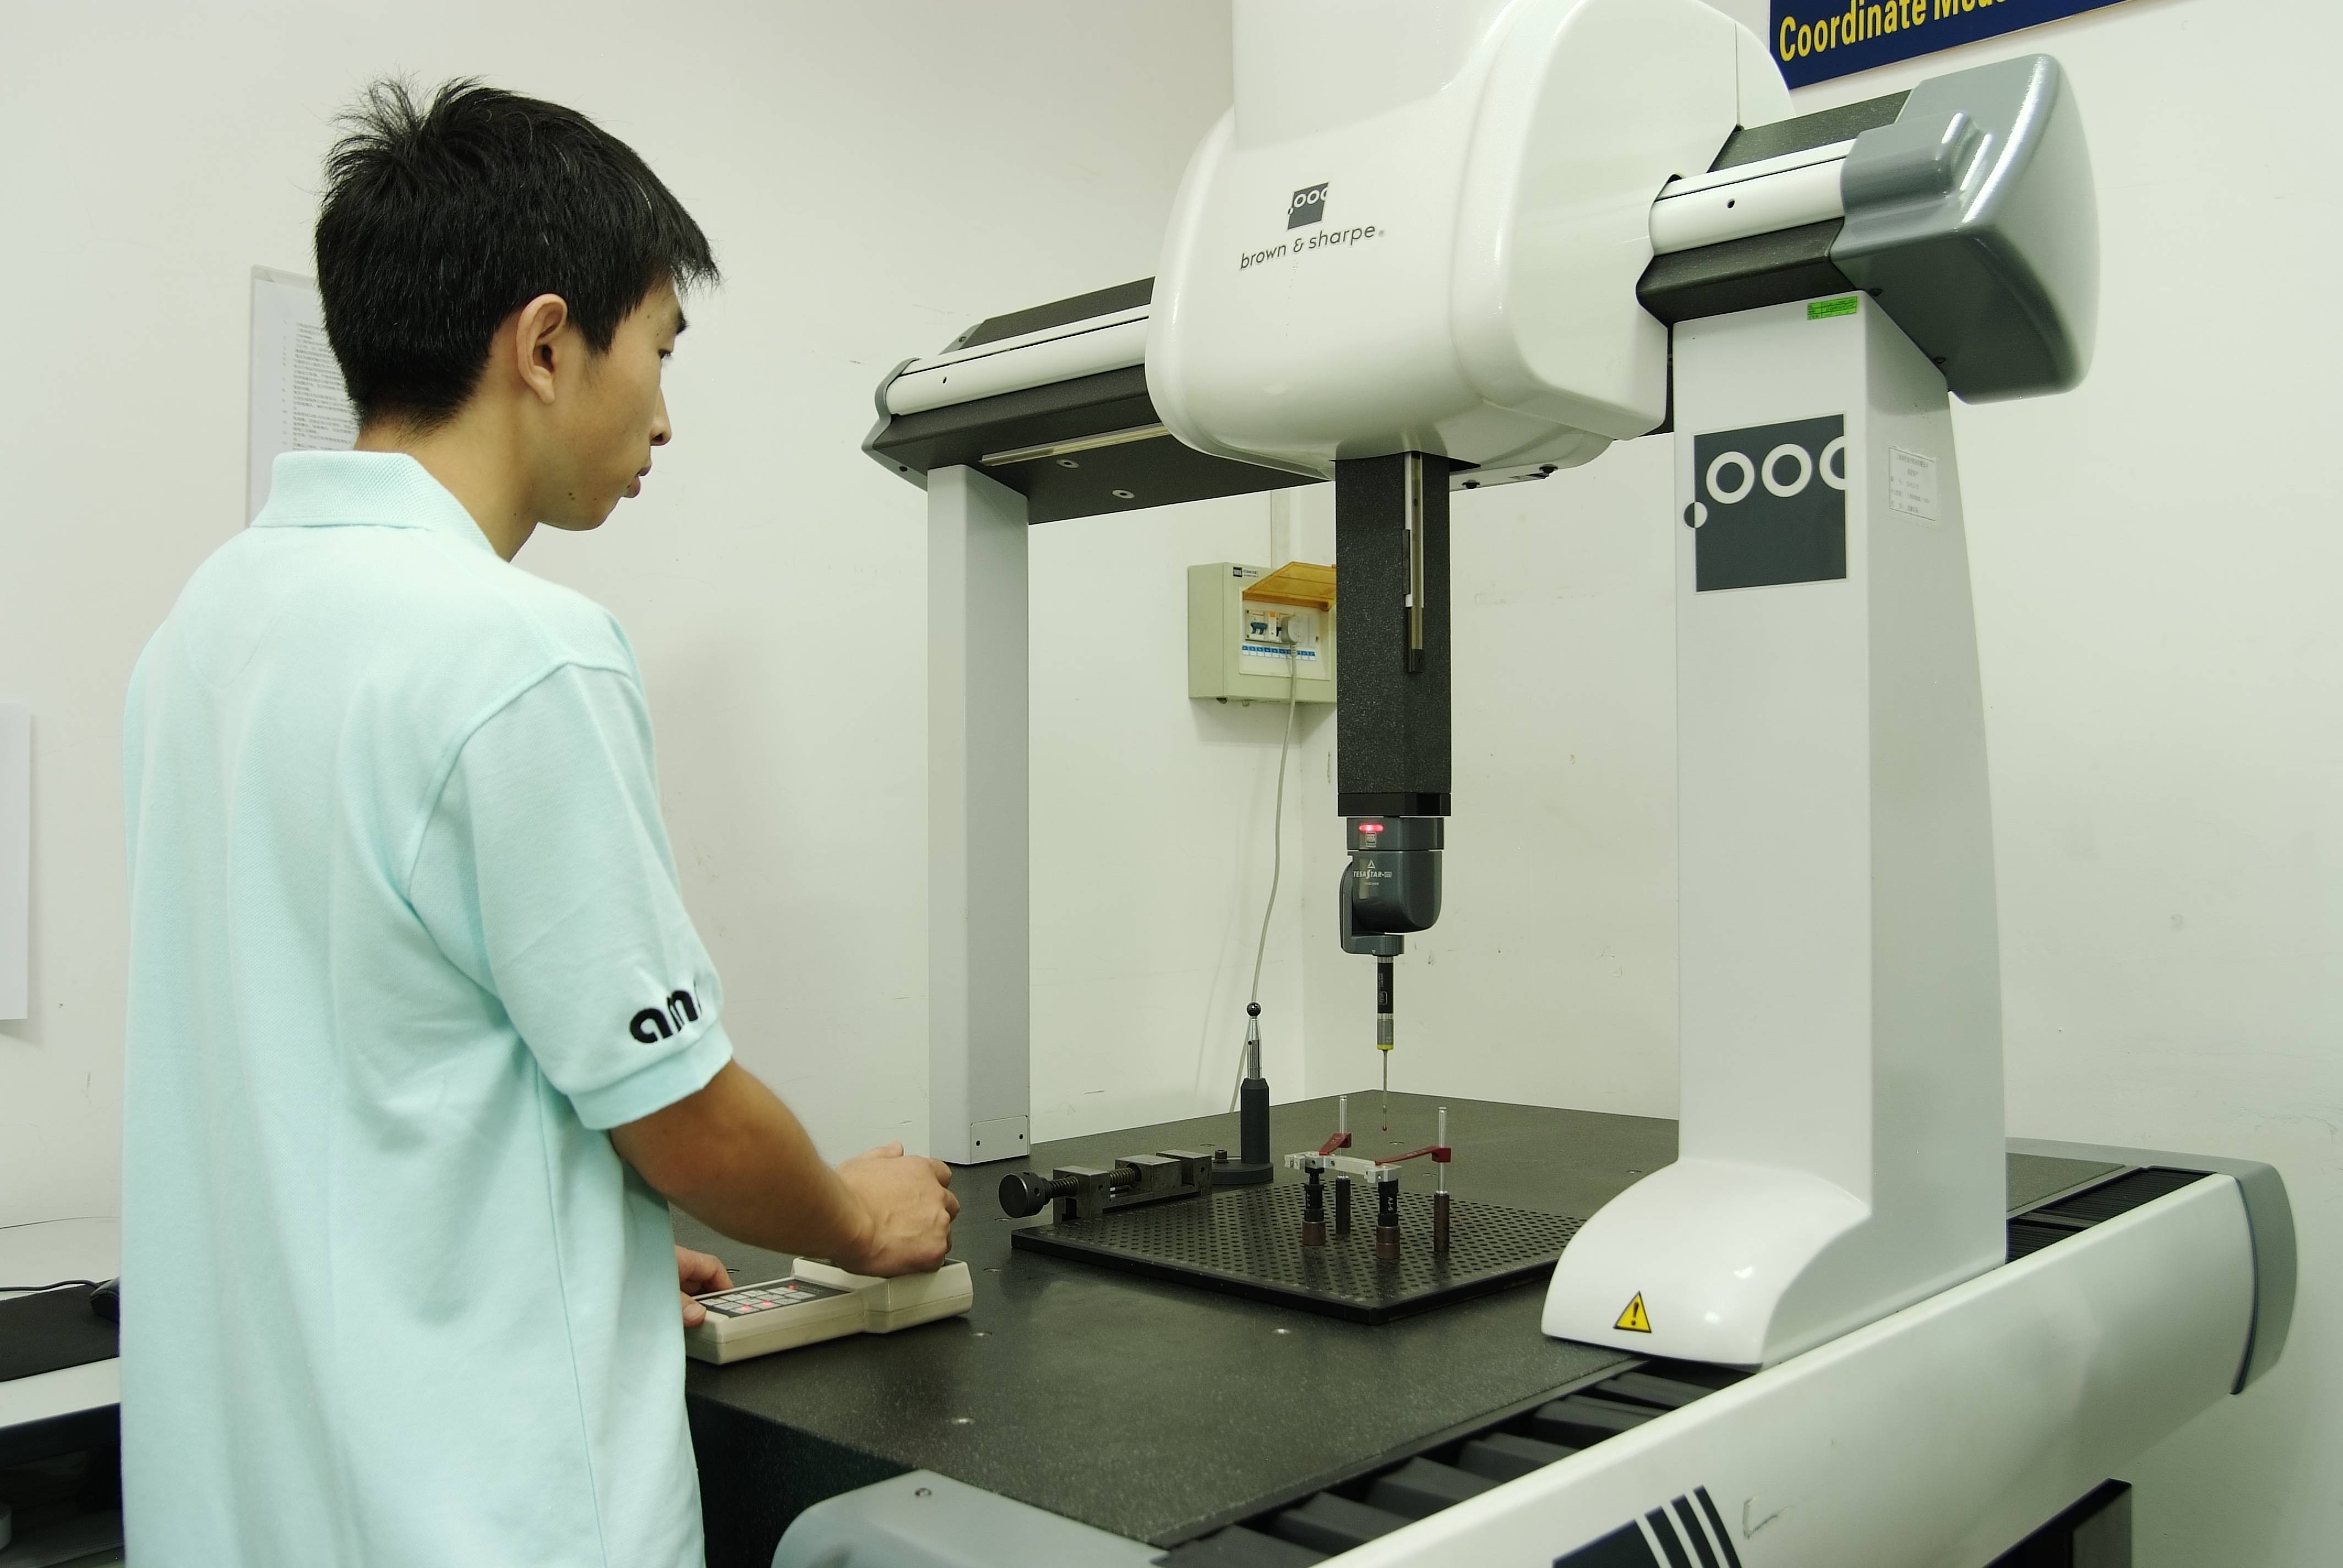 A coordinate measuring machine, a tool to make 3D measurements.